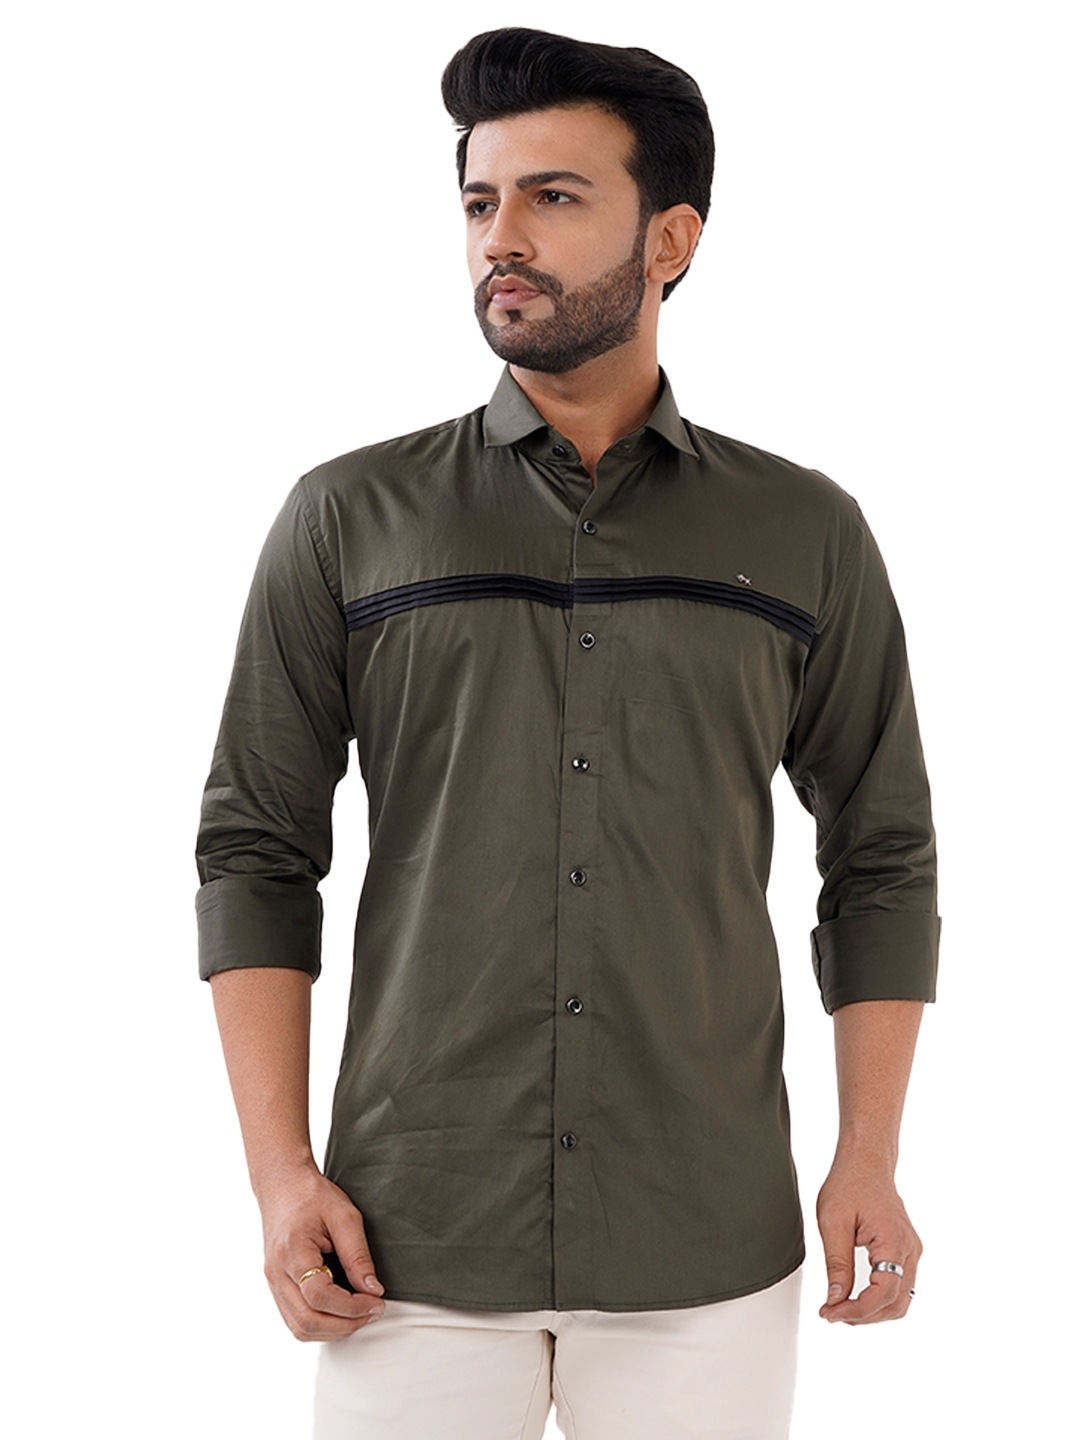 D'cot by Donear | D'cot by Donear Men's Green Cotton Casual Shirts 0